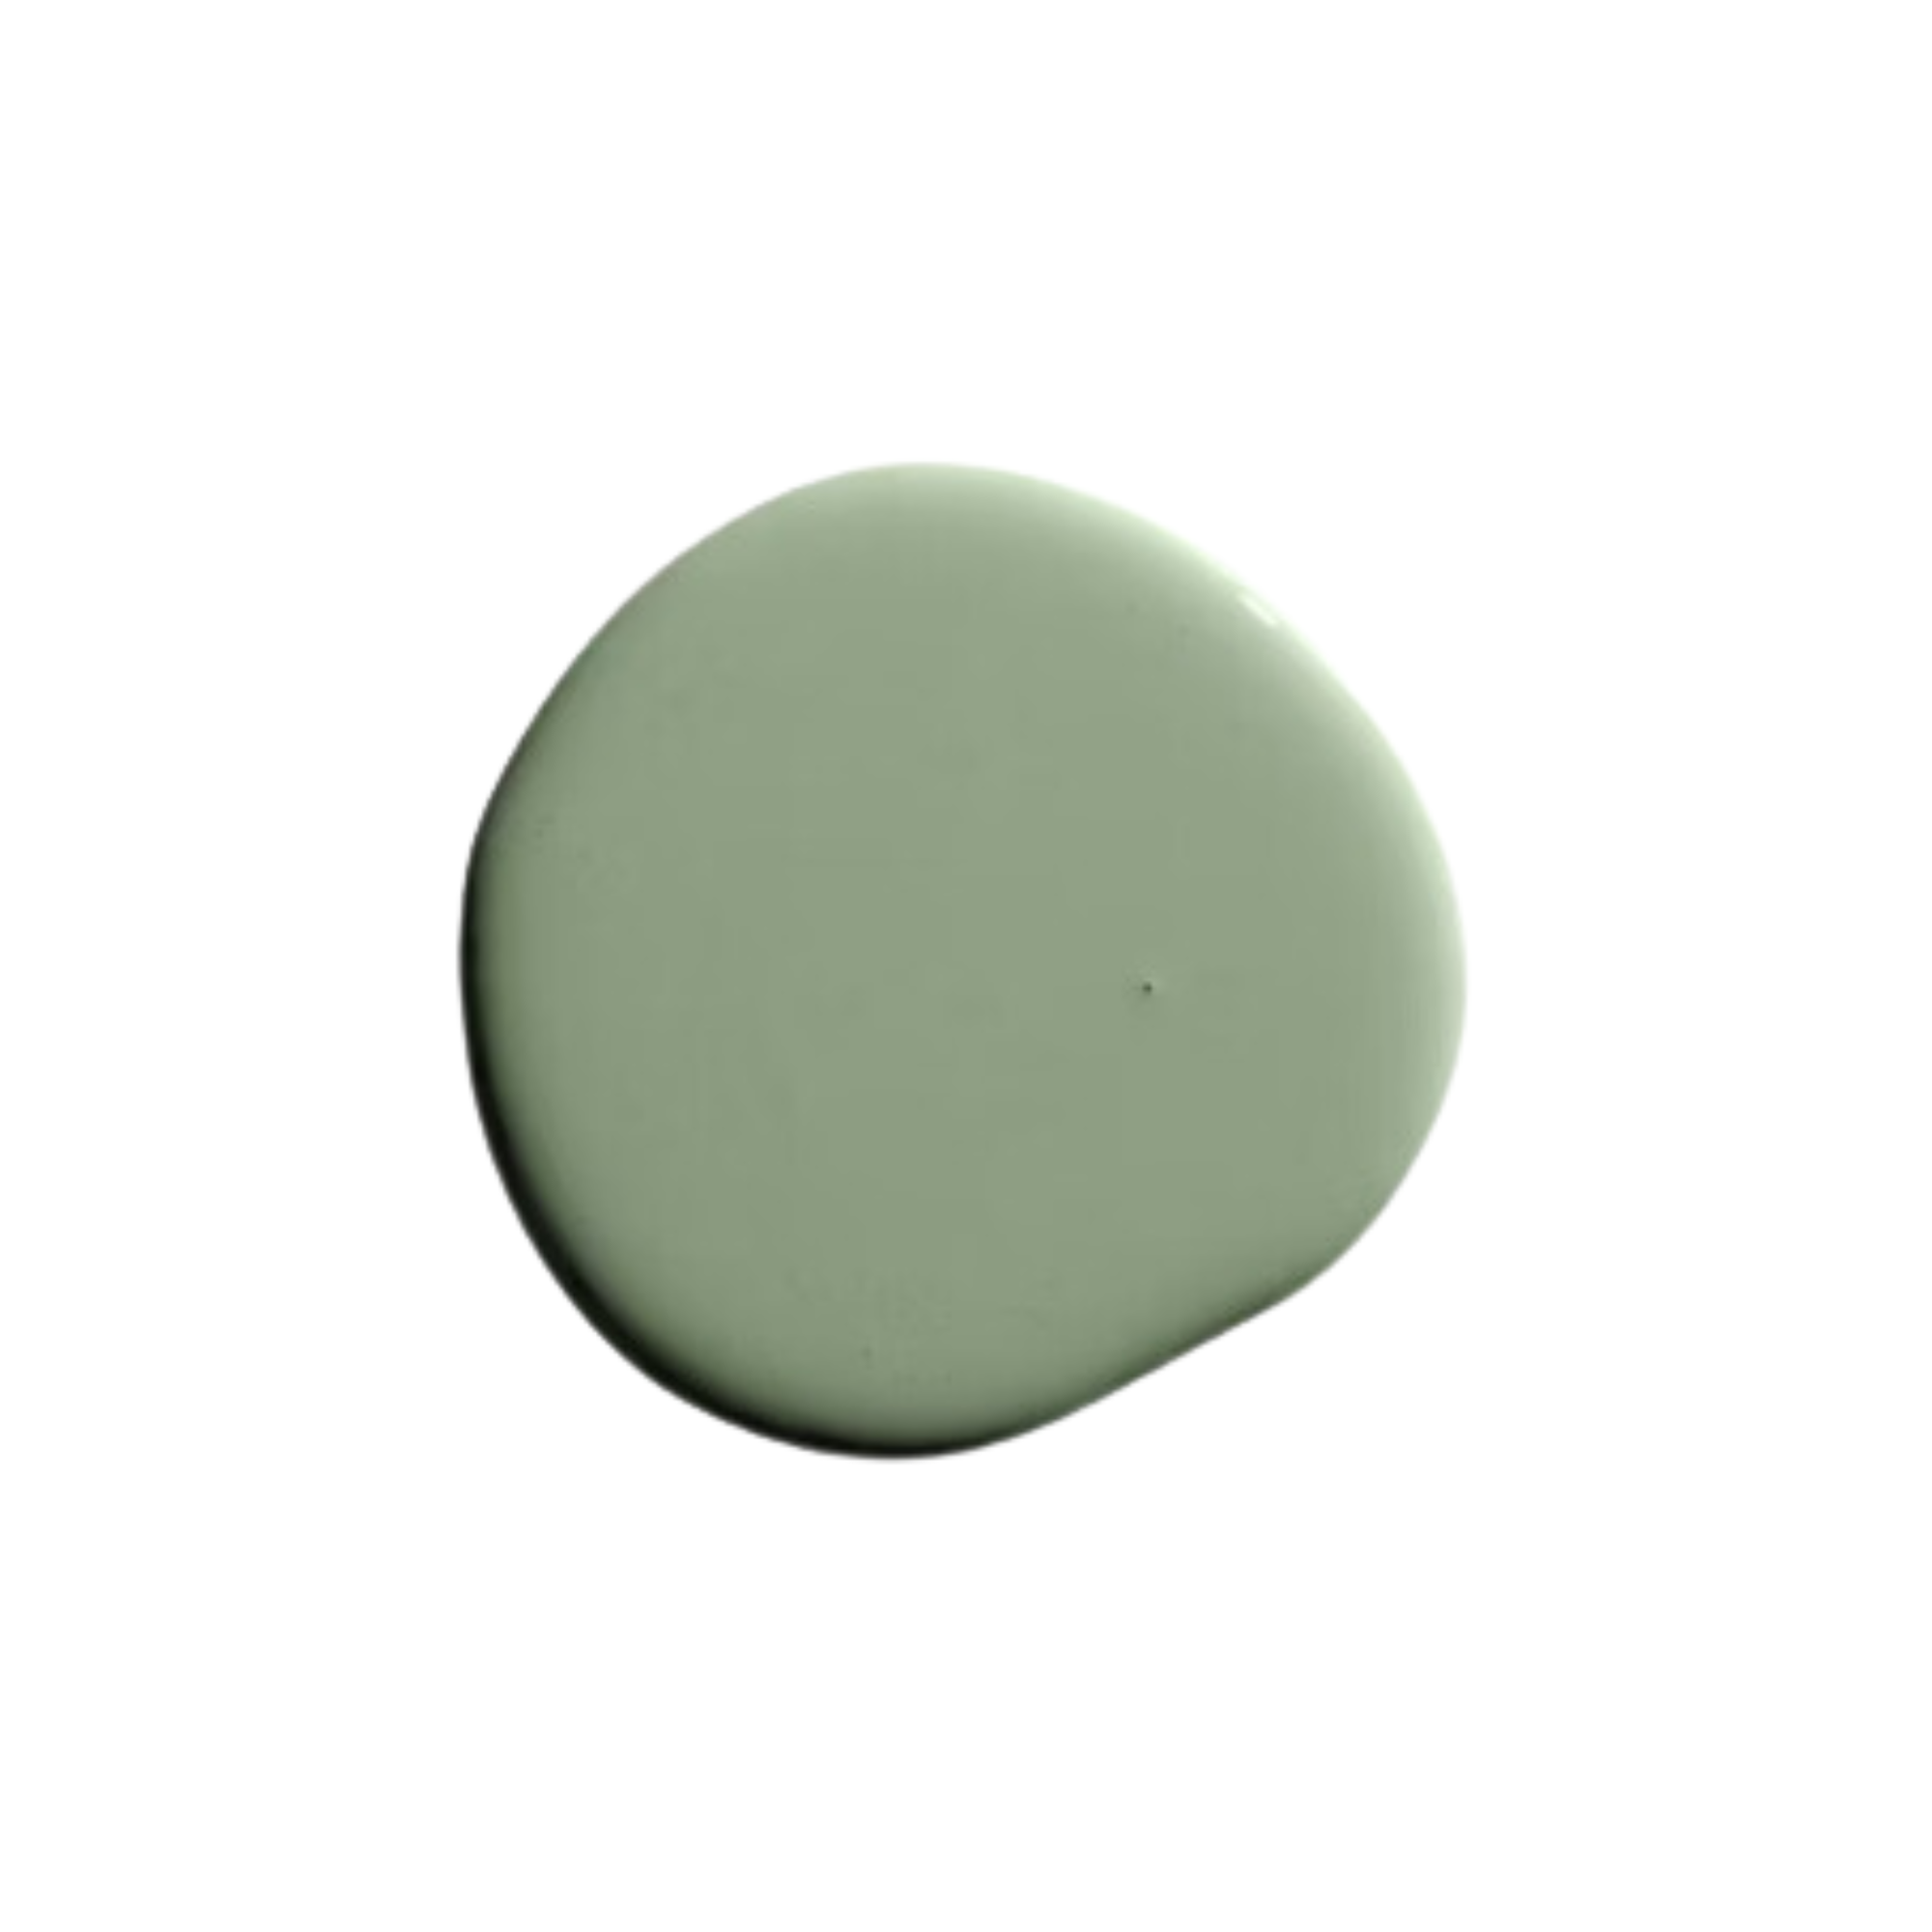 A swatch of mid-toned green paint